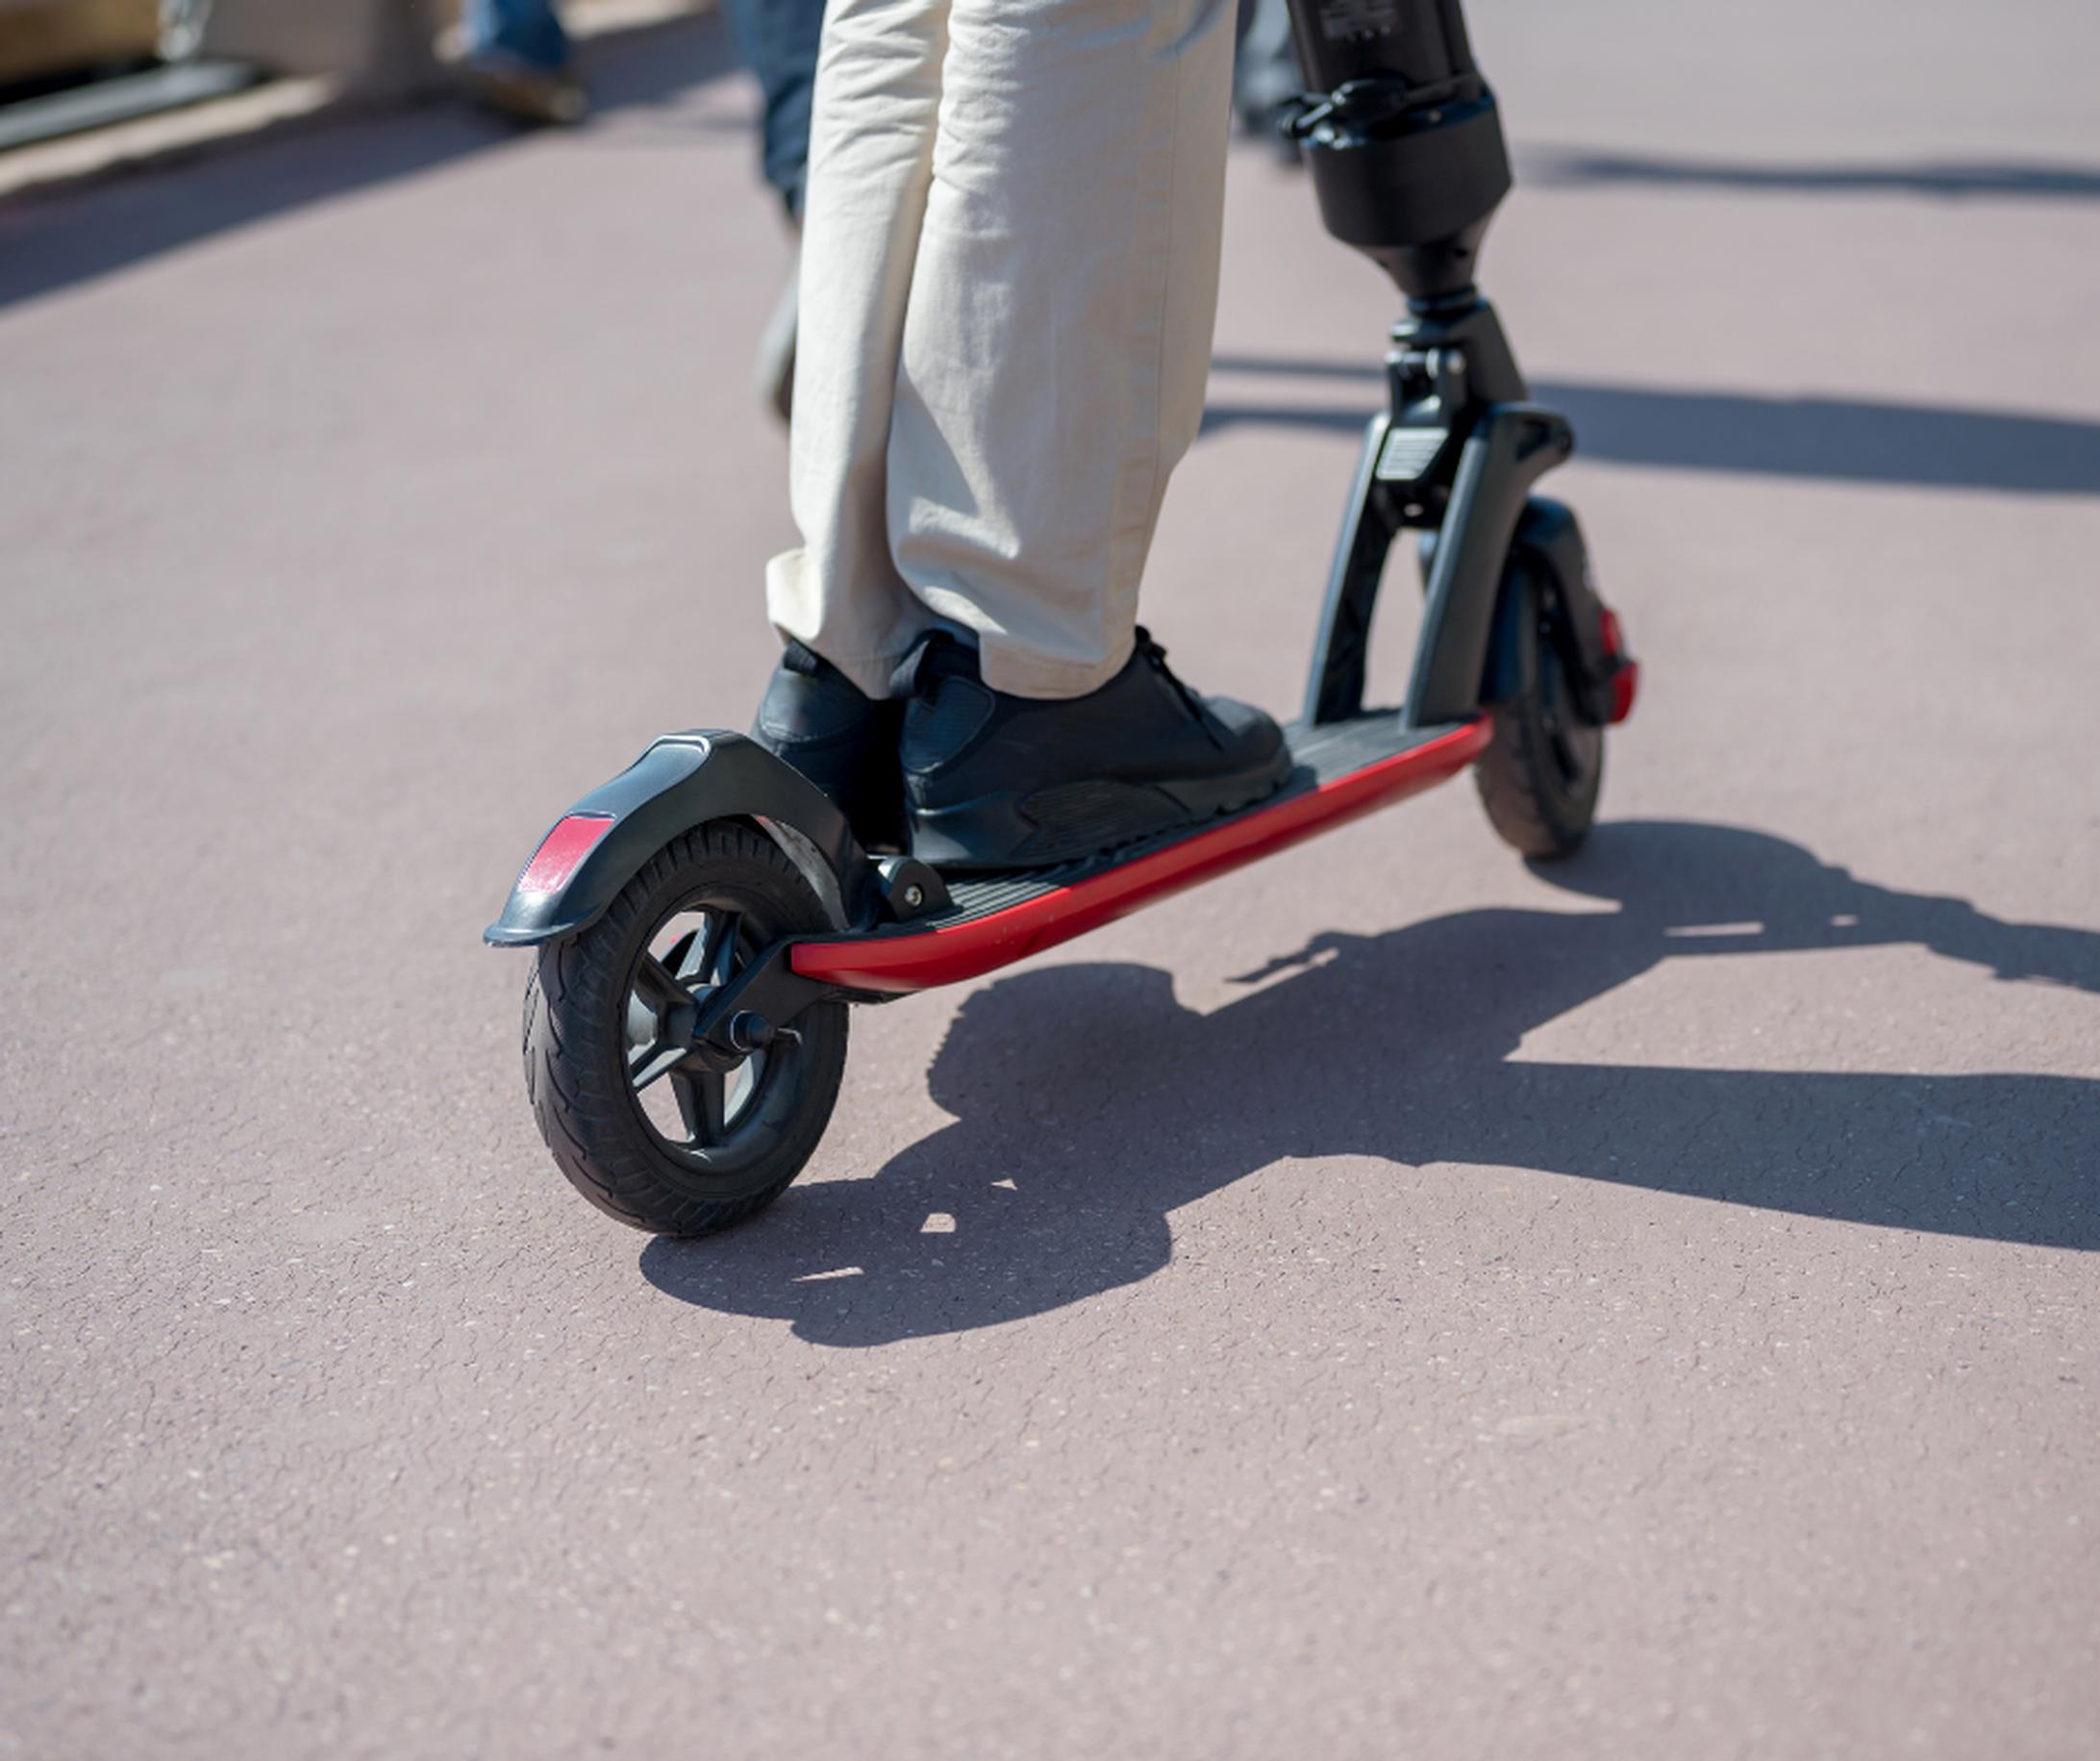 Reported Road casualties Great Britain, annual report: 2020 reveals there were 484 casualties involving e-scooters, of which one person was killed, 128 were seriously injured and 355 slightly injured